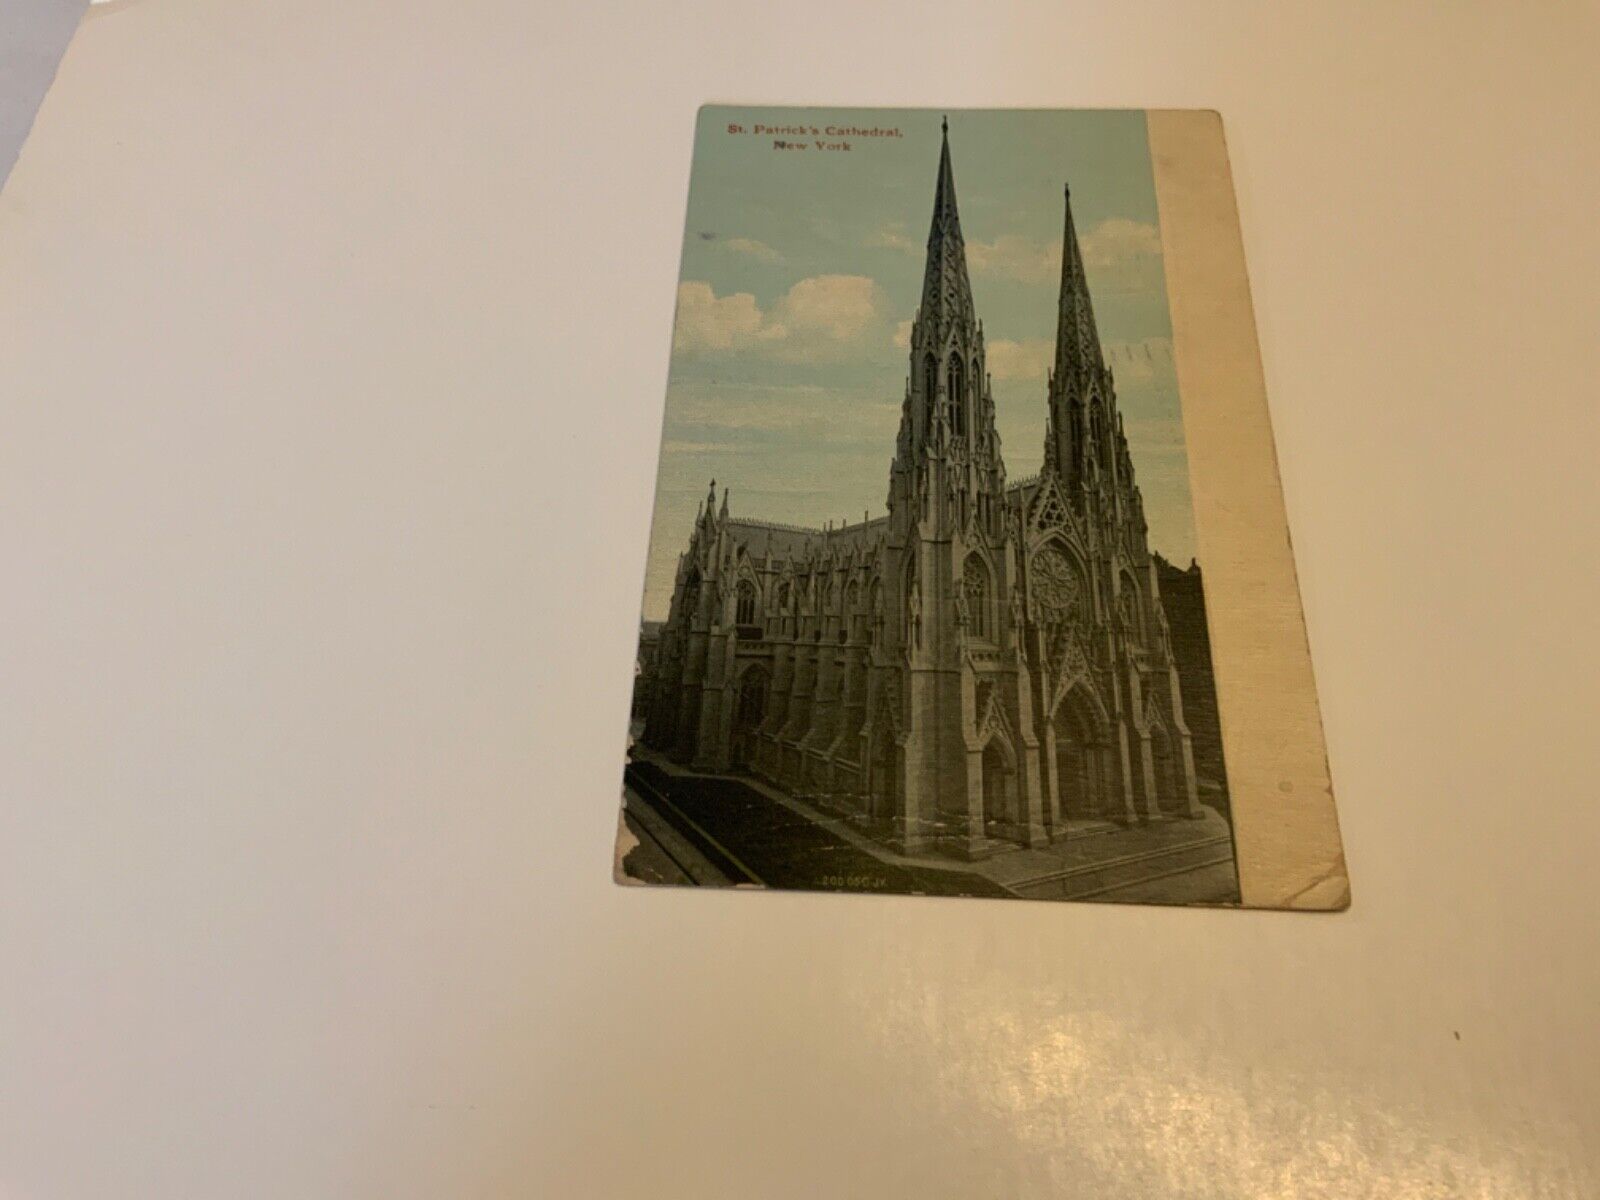 New York City,N.Y. ~ St. Patrick’s Cathedral - 1914 Antique Postcard